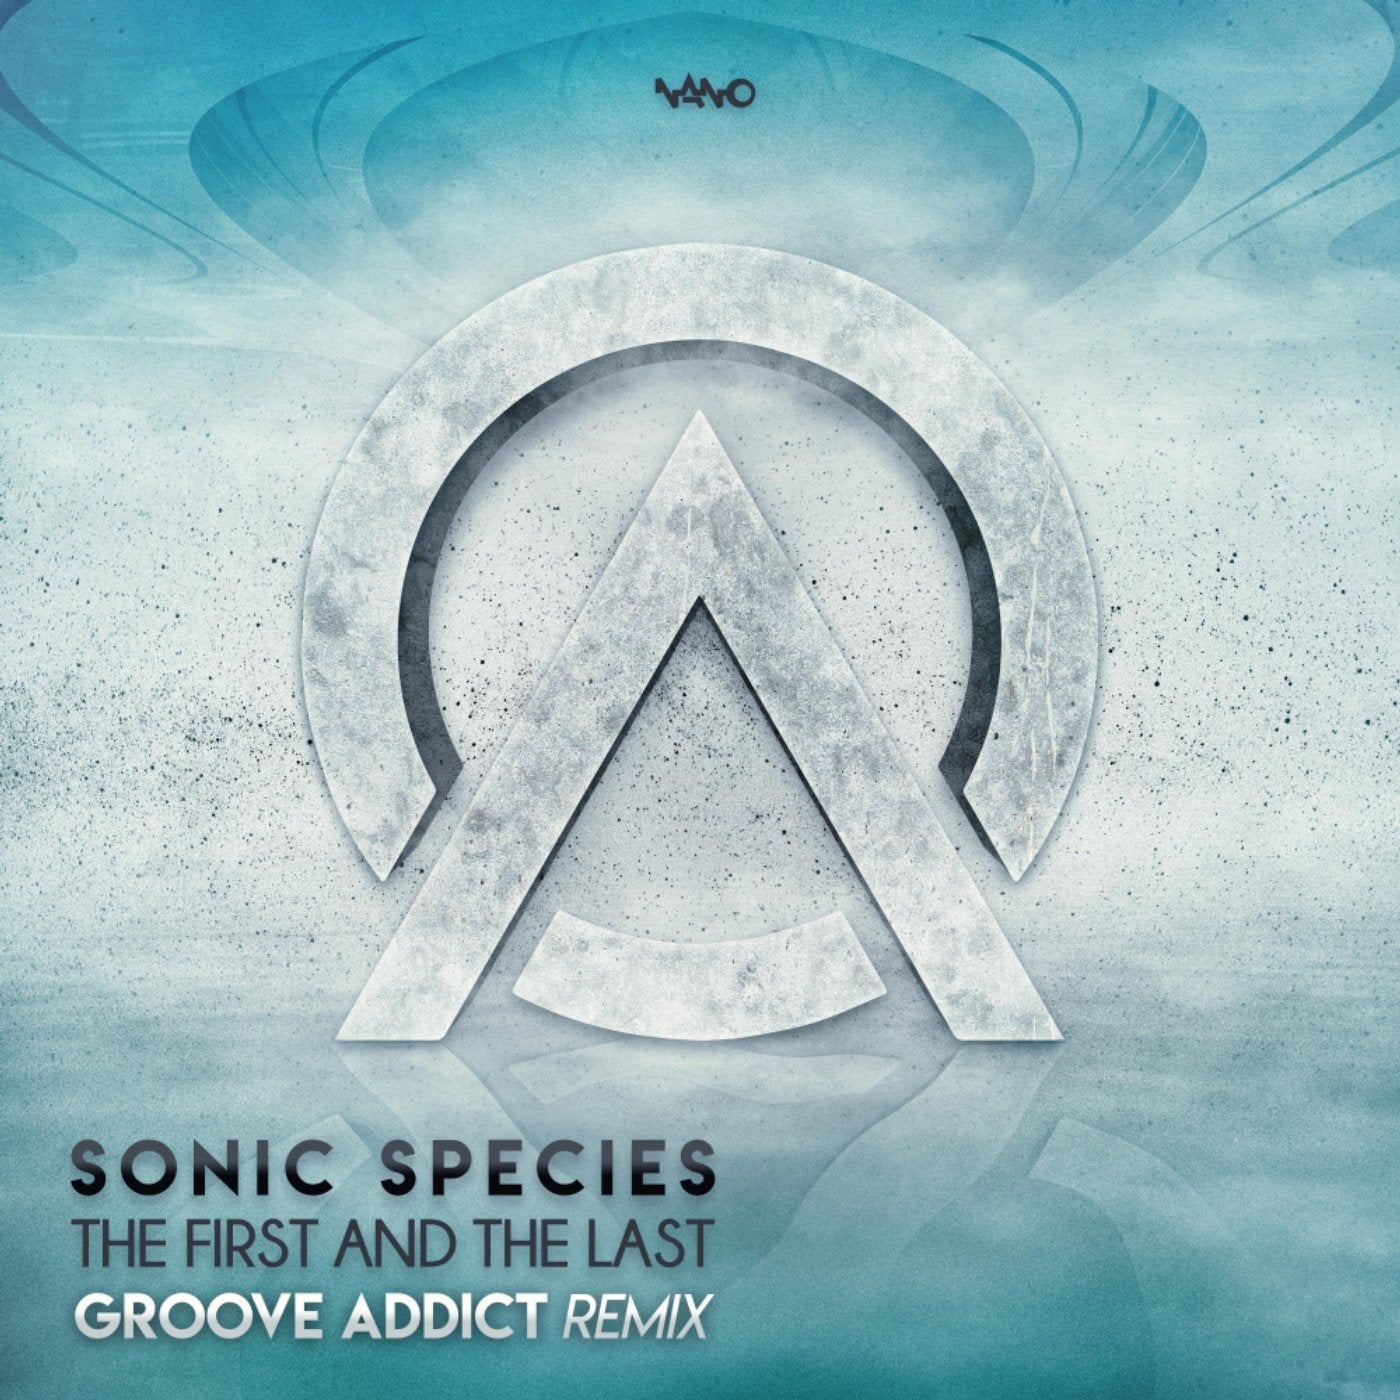 V society. Sonic species. 2014 - Sonic species - Remixes. Транс музыка Соник. Stryker & Sonic species - Now is the time.